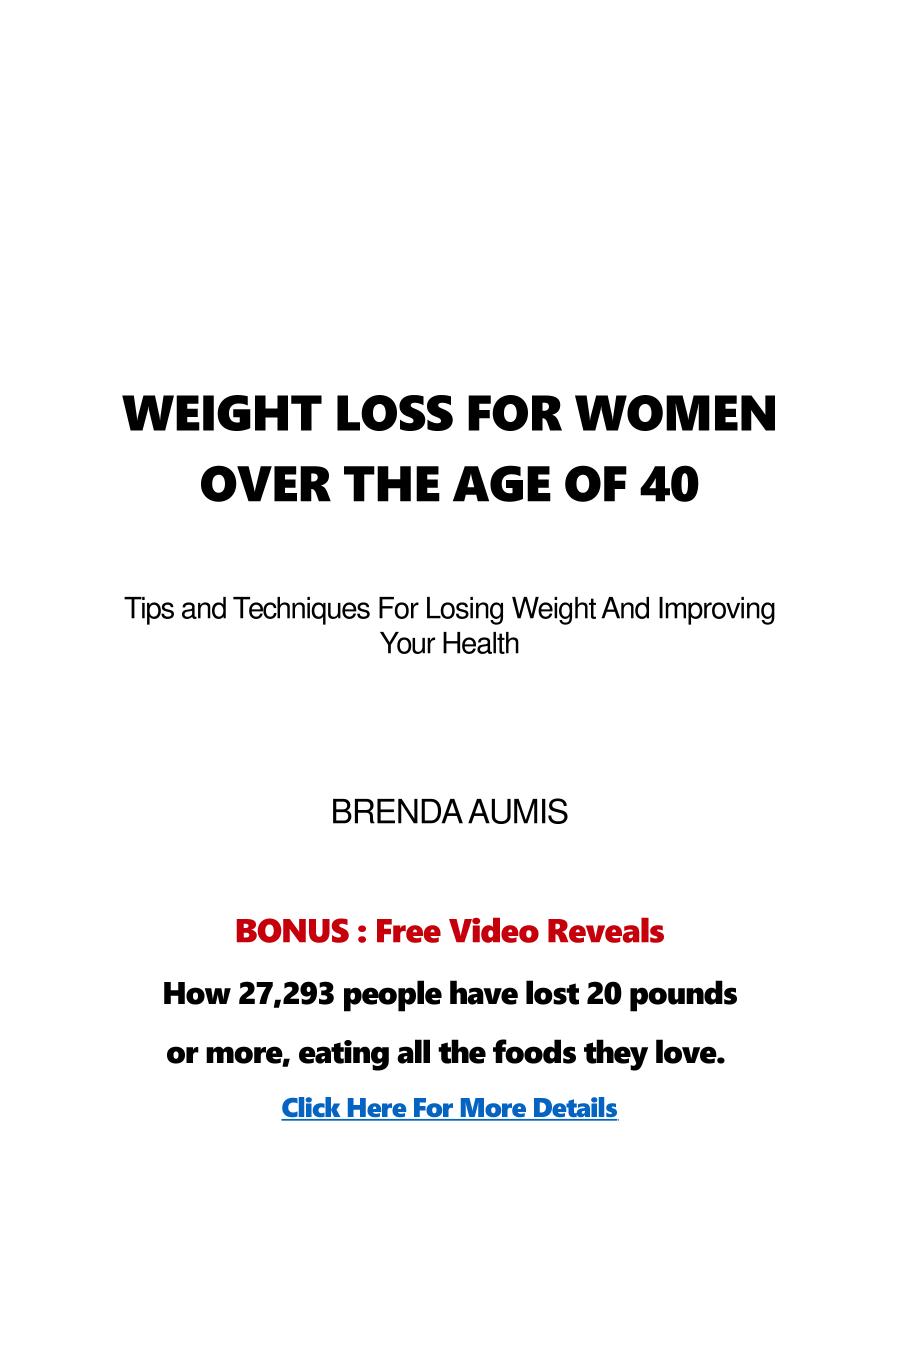 Weight Loss For Women Over 40 : Tips and Techniques For Losing Weight and Improving Your Health